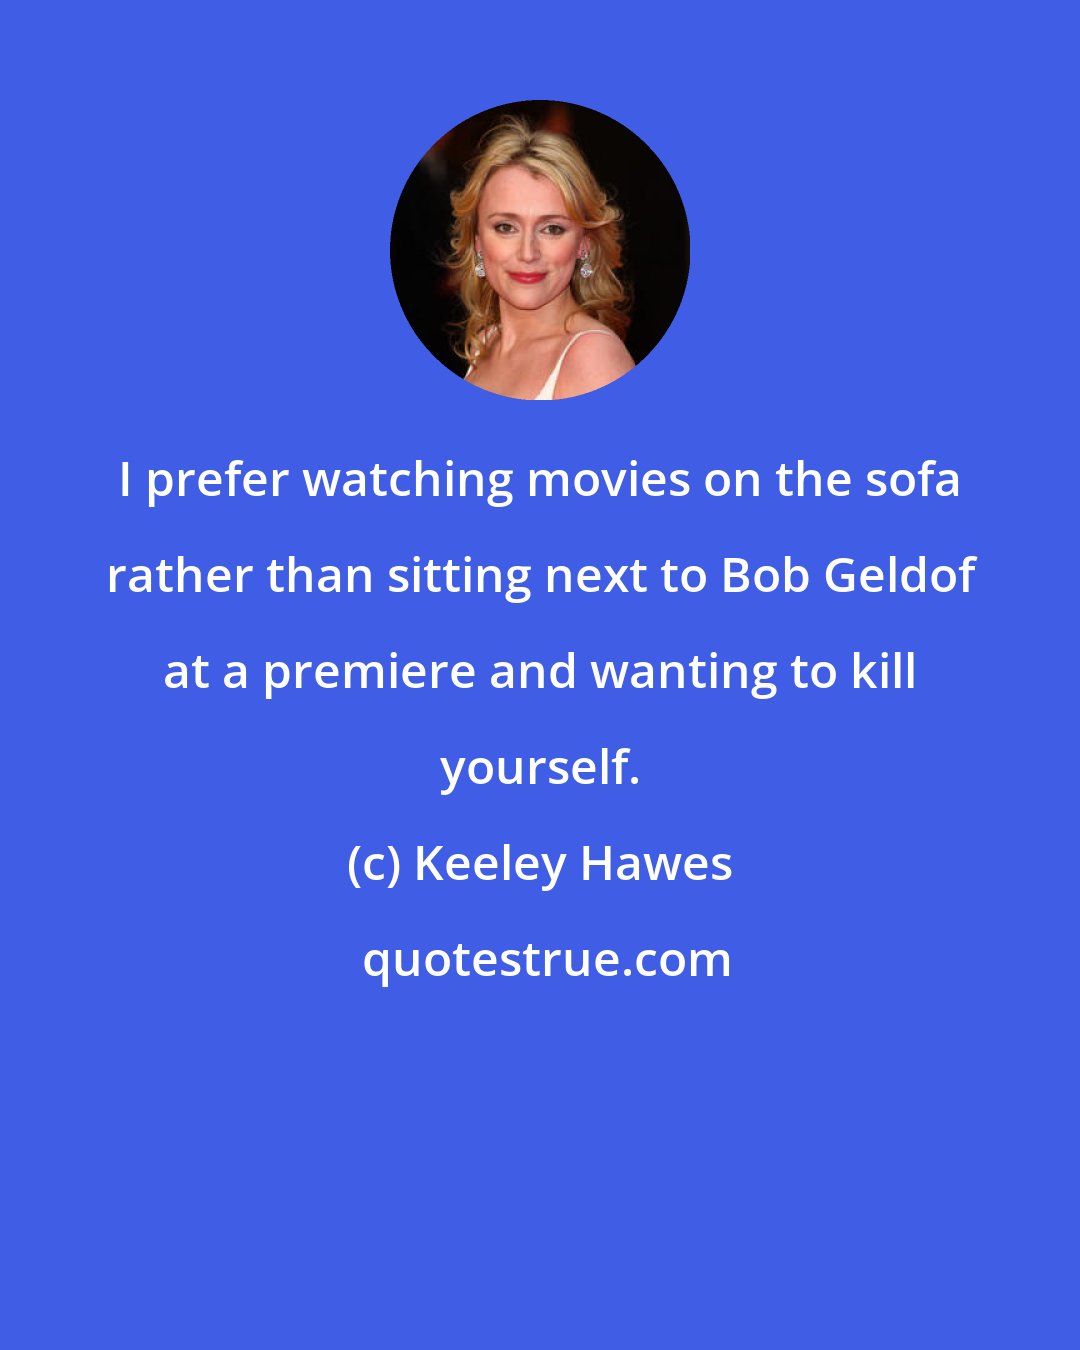 Keeley Hawes: I prefer watching movies on the sofa rather than sitting next to Bob Geldof at a premiere and wanting to kill yourself.